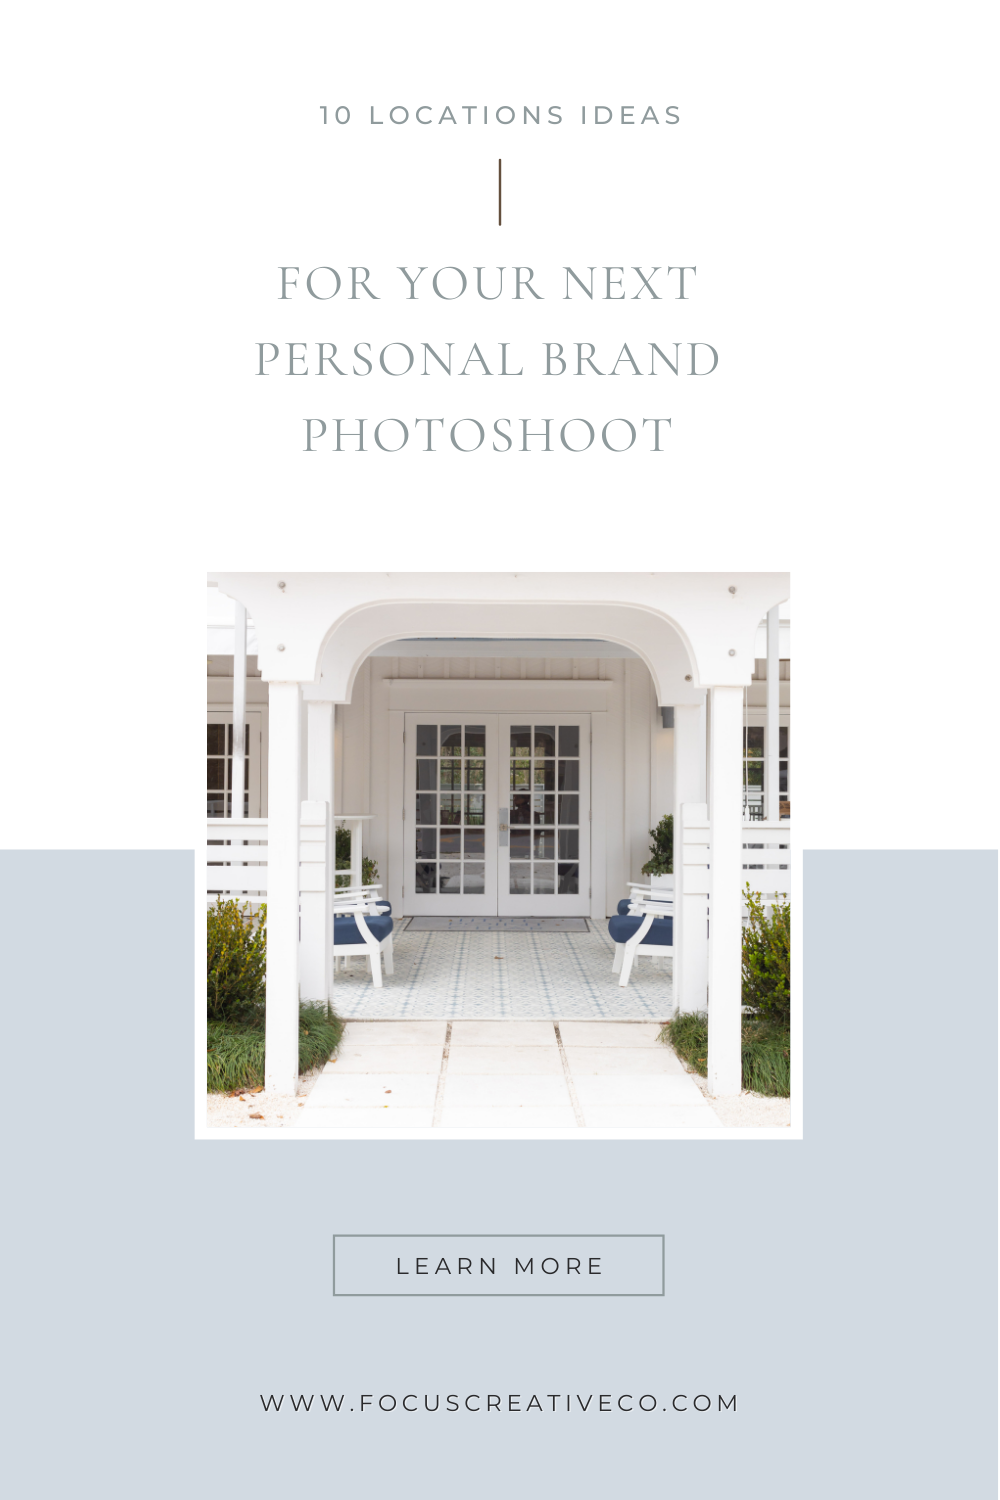 10 Location Ideas for Your Next Personal Brand Photoshoot